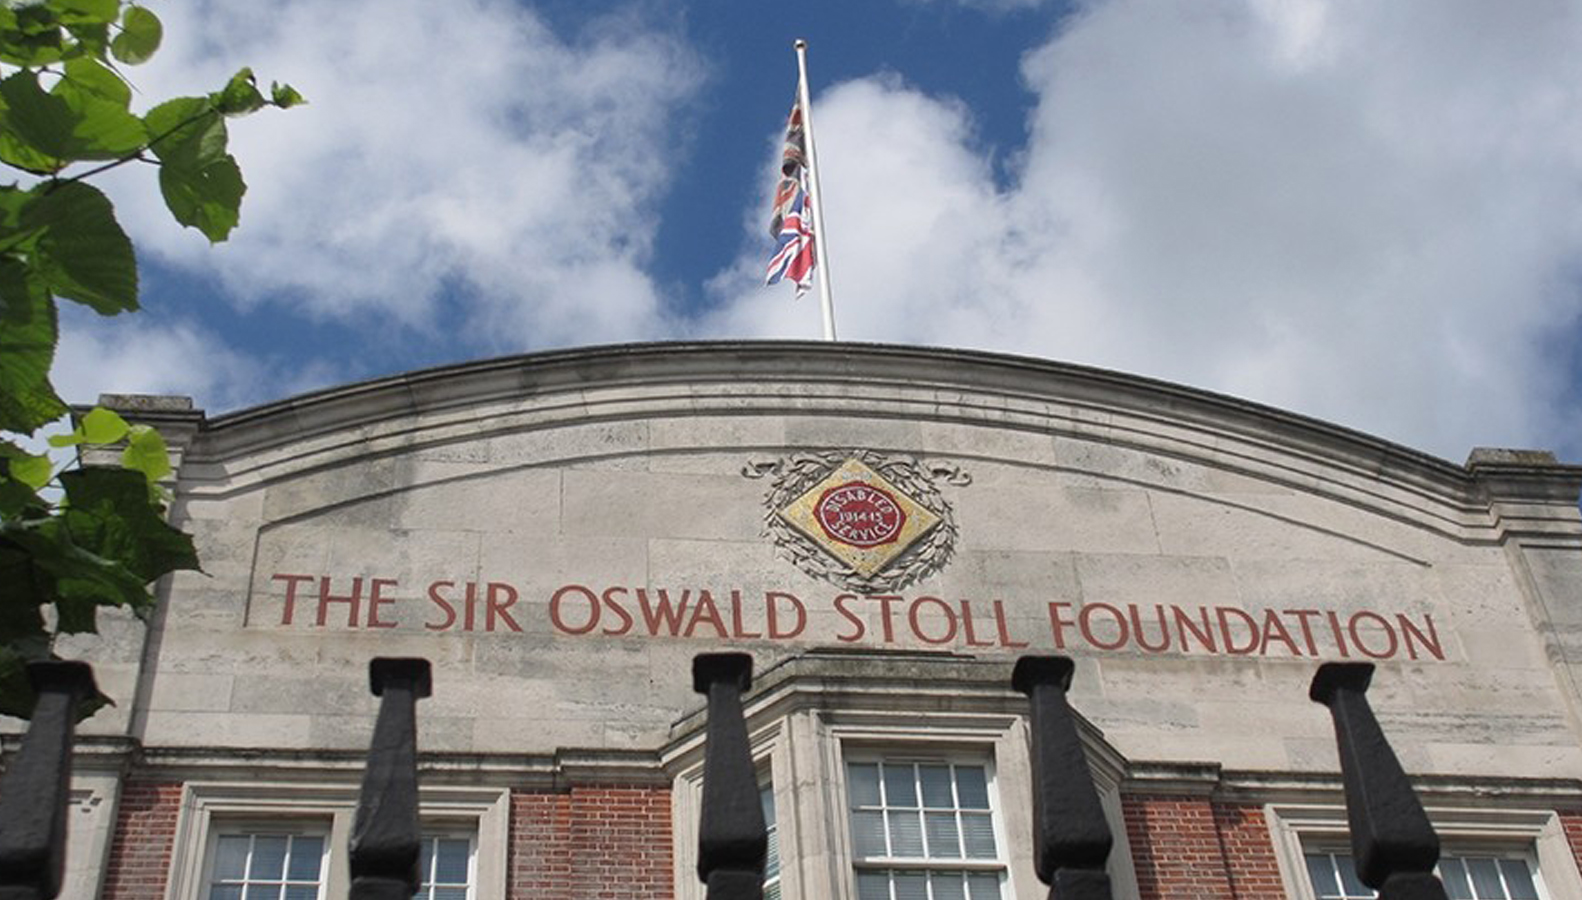 The Sir Oswald Stoll Foundation appoints Proctor & Matthews to Approved Panel for Architects